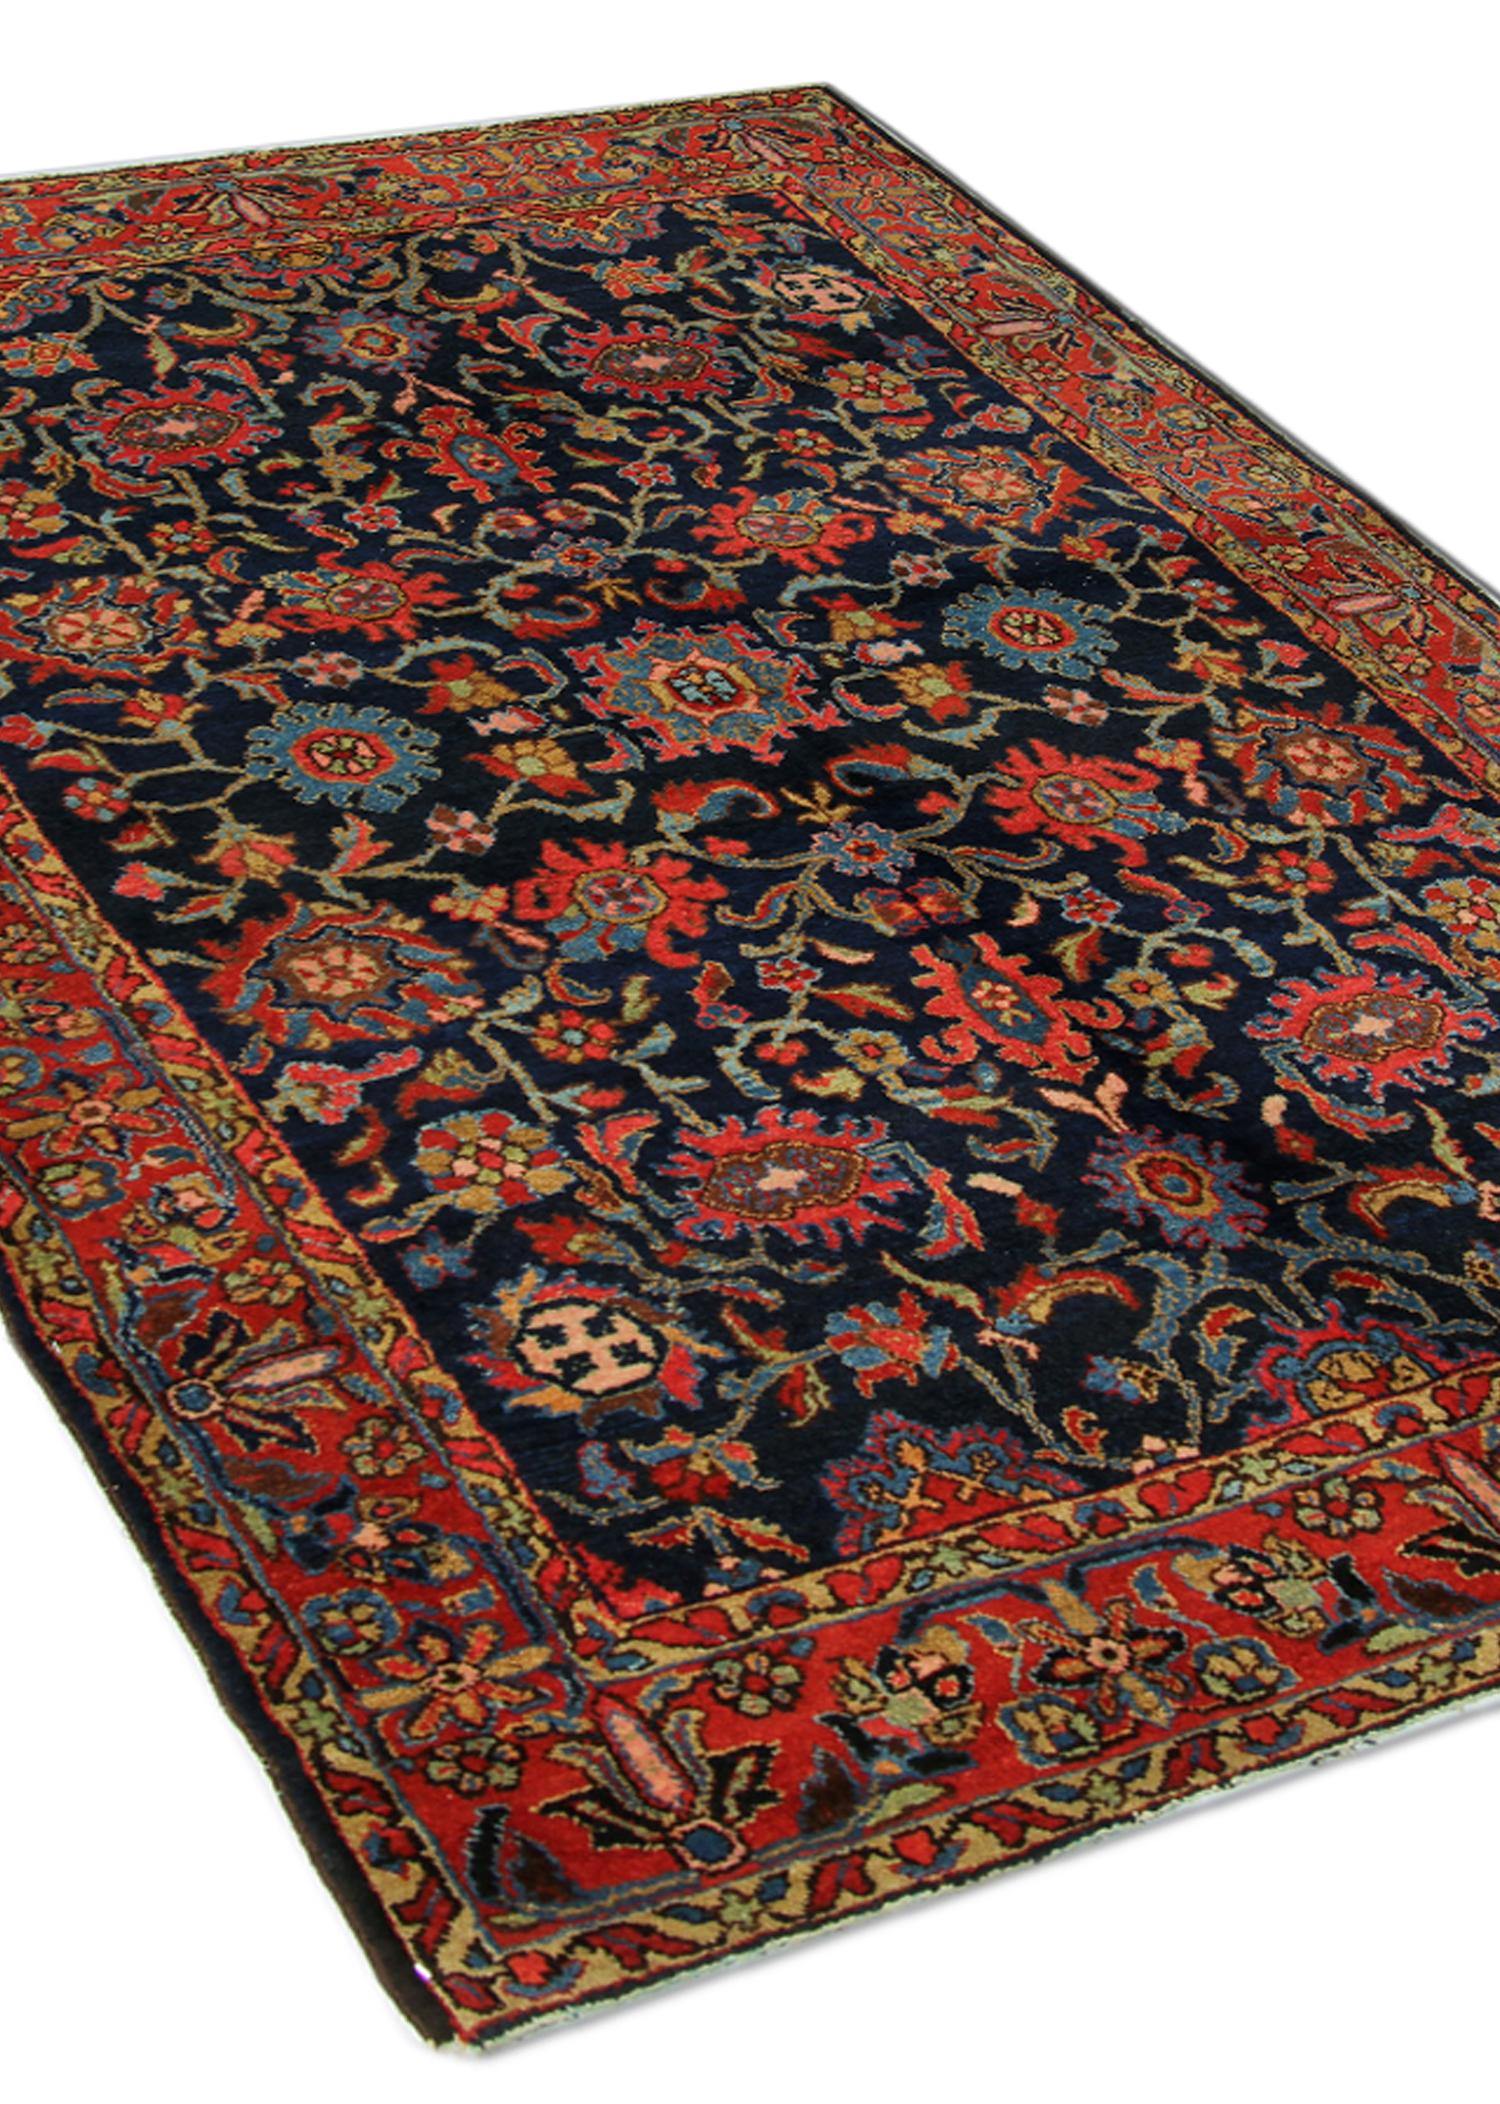 Are you looking for an antique carpet to uplift your home? Then look no further! This Fine Antique Rug is a beautiful example of traditional rugs woven in the early 20th century, circa 1900. The masterpiece features a dark background with